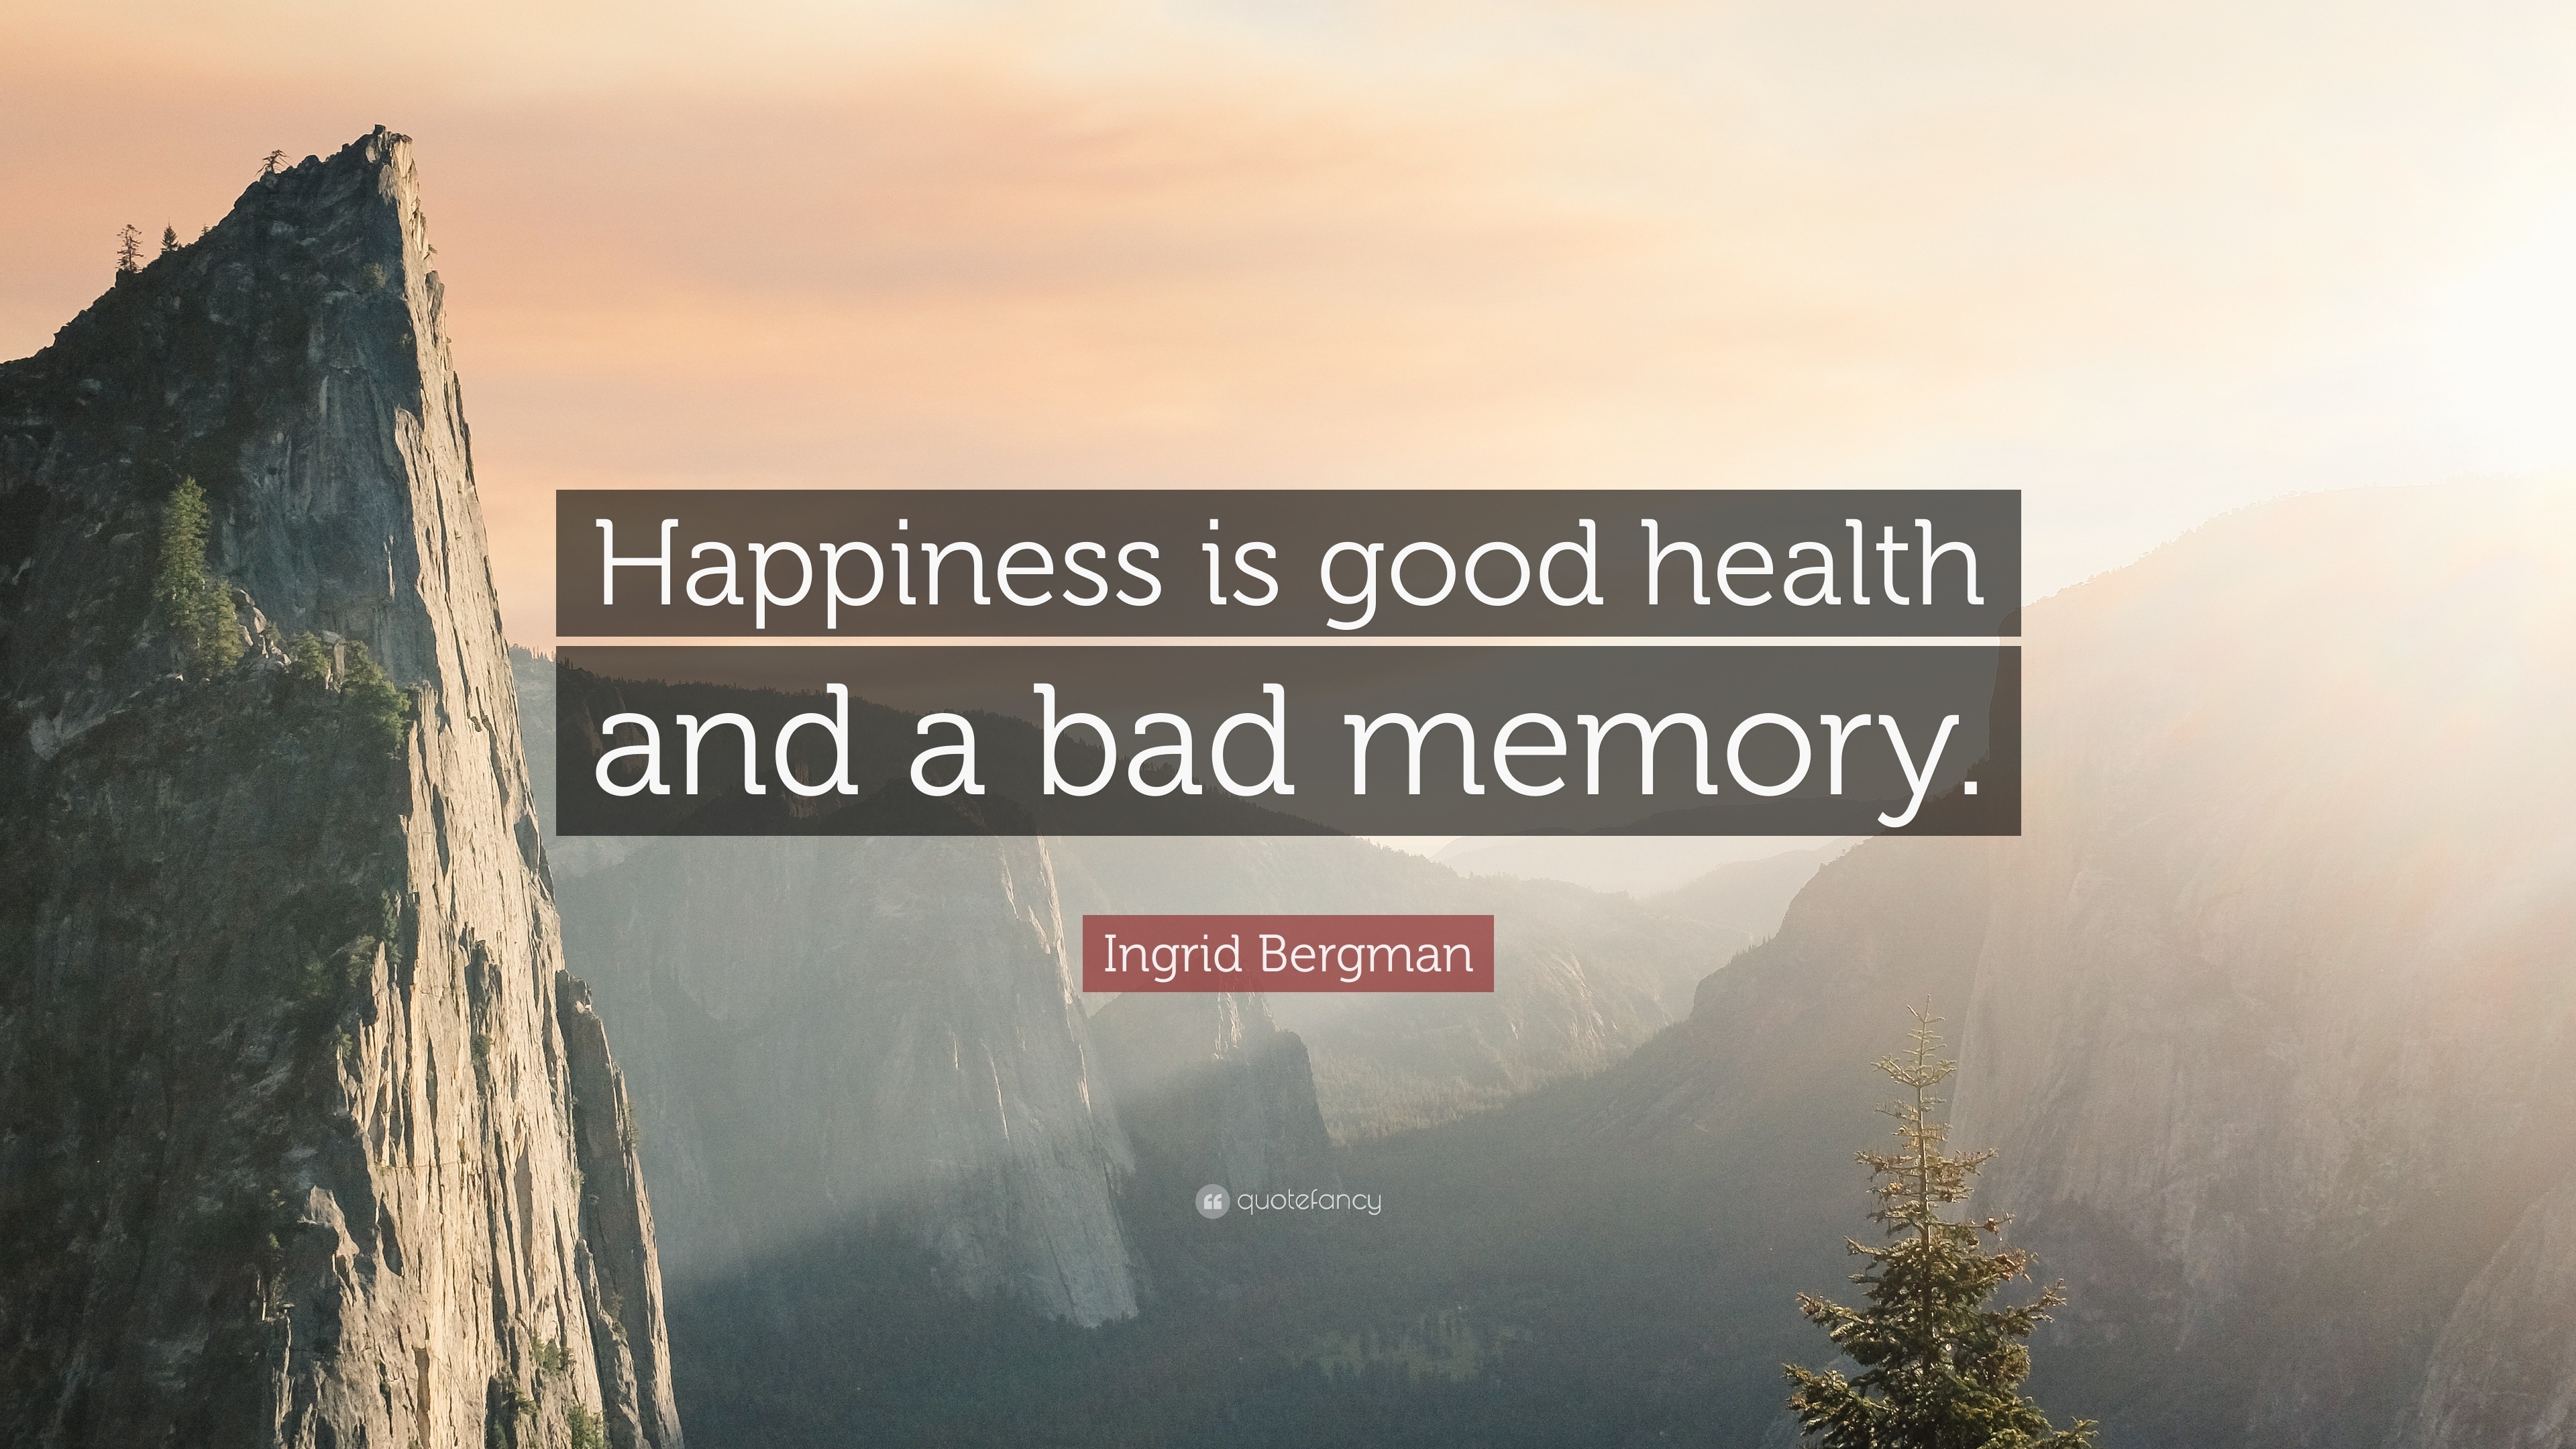 Ingrid Bergman Quote: “Happiness is good health and a bad memory.”